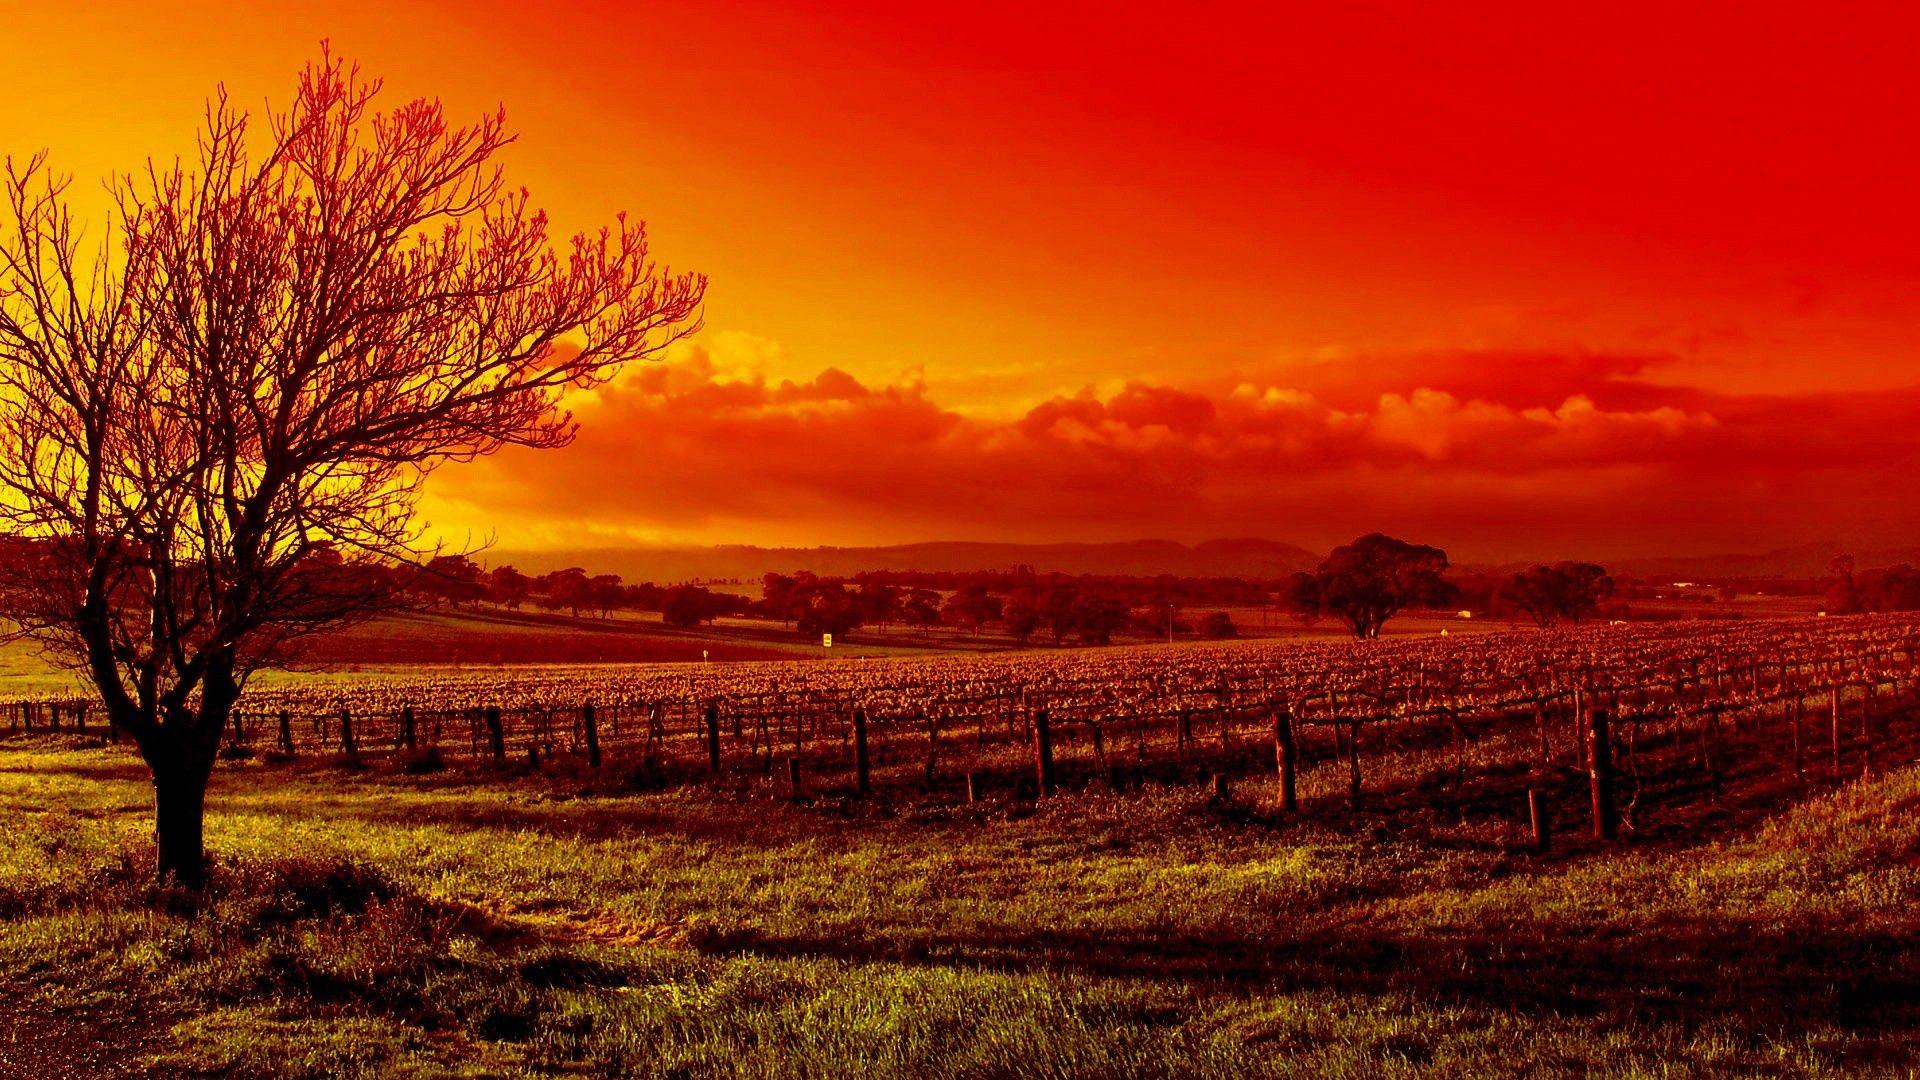 Widescreen HDQ Wallpaper of Vineyard for Windows and Mac Systems